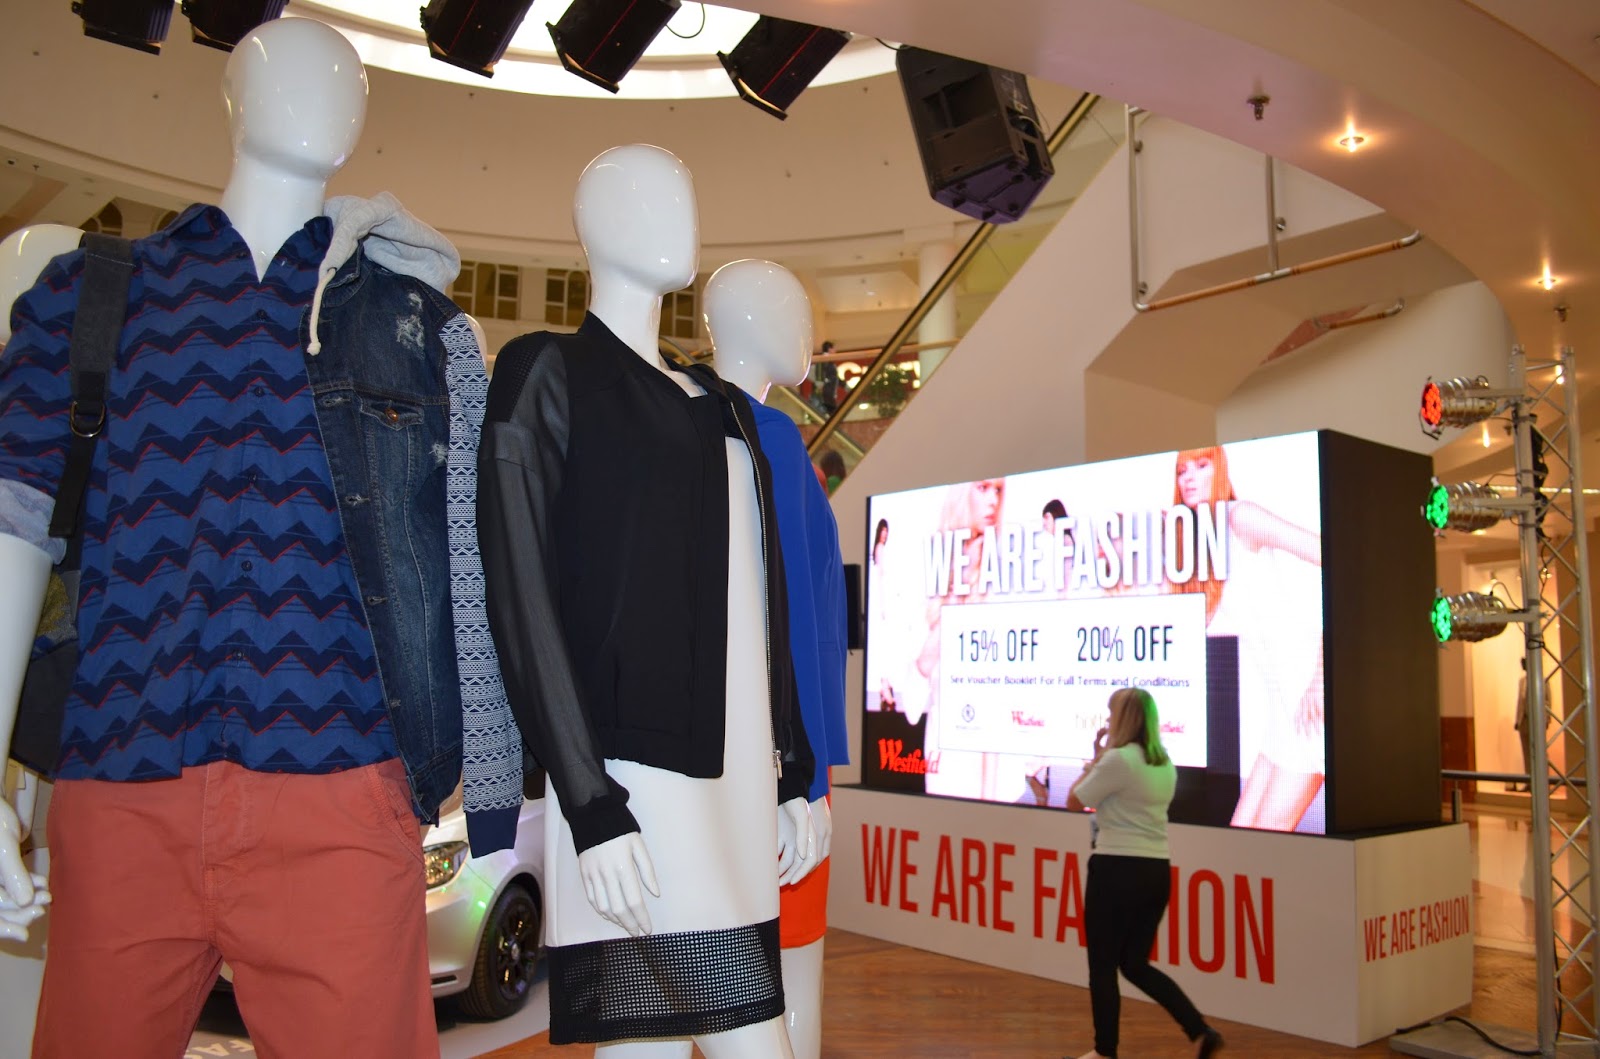 Westfield Merry Hill Fashion Show - 15/03/14